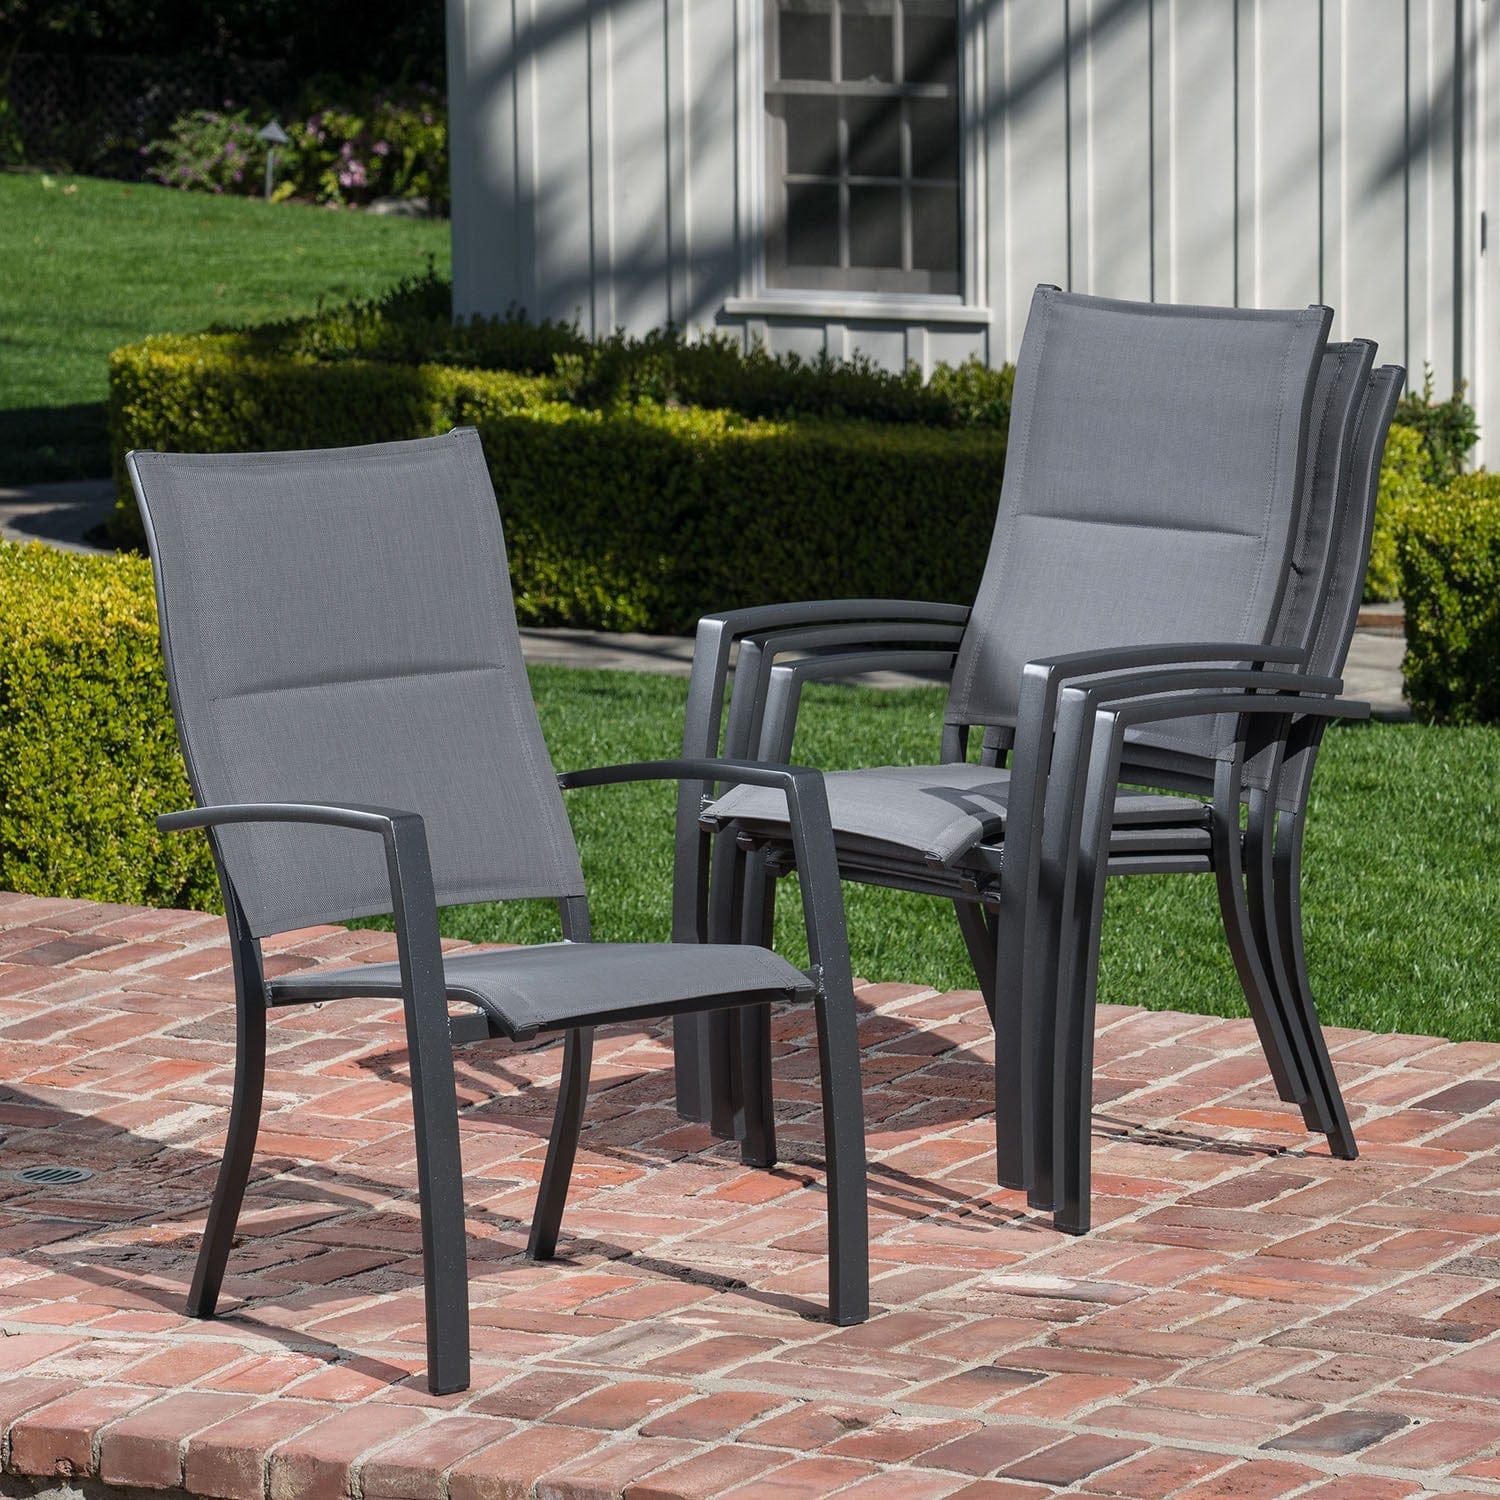 Hanover Outdoor Dining Set Hanover - Tucson7pc: 6 Aluminum High Back Padded Chairs, Faux Wood Dining Table - TUCSDN7PCHB-GRY